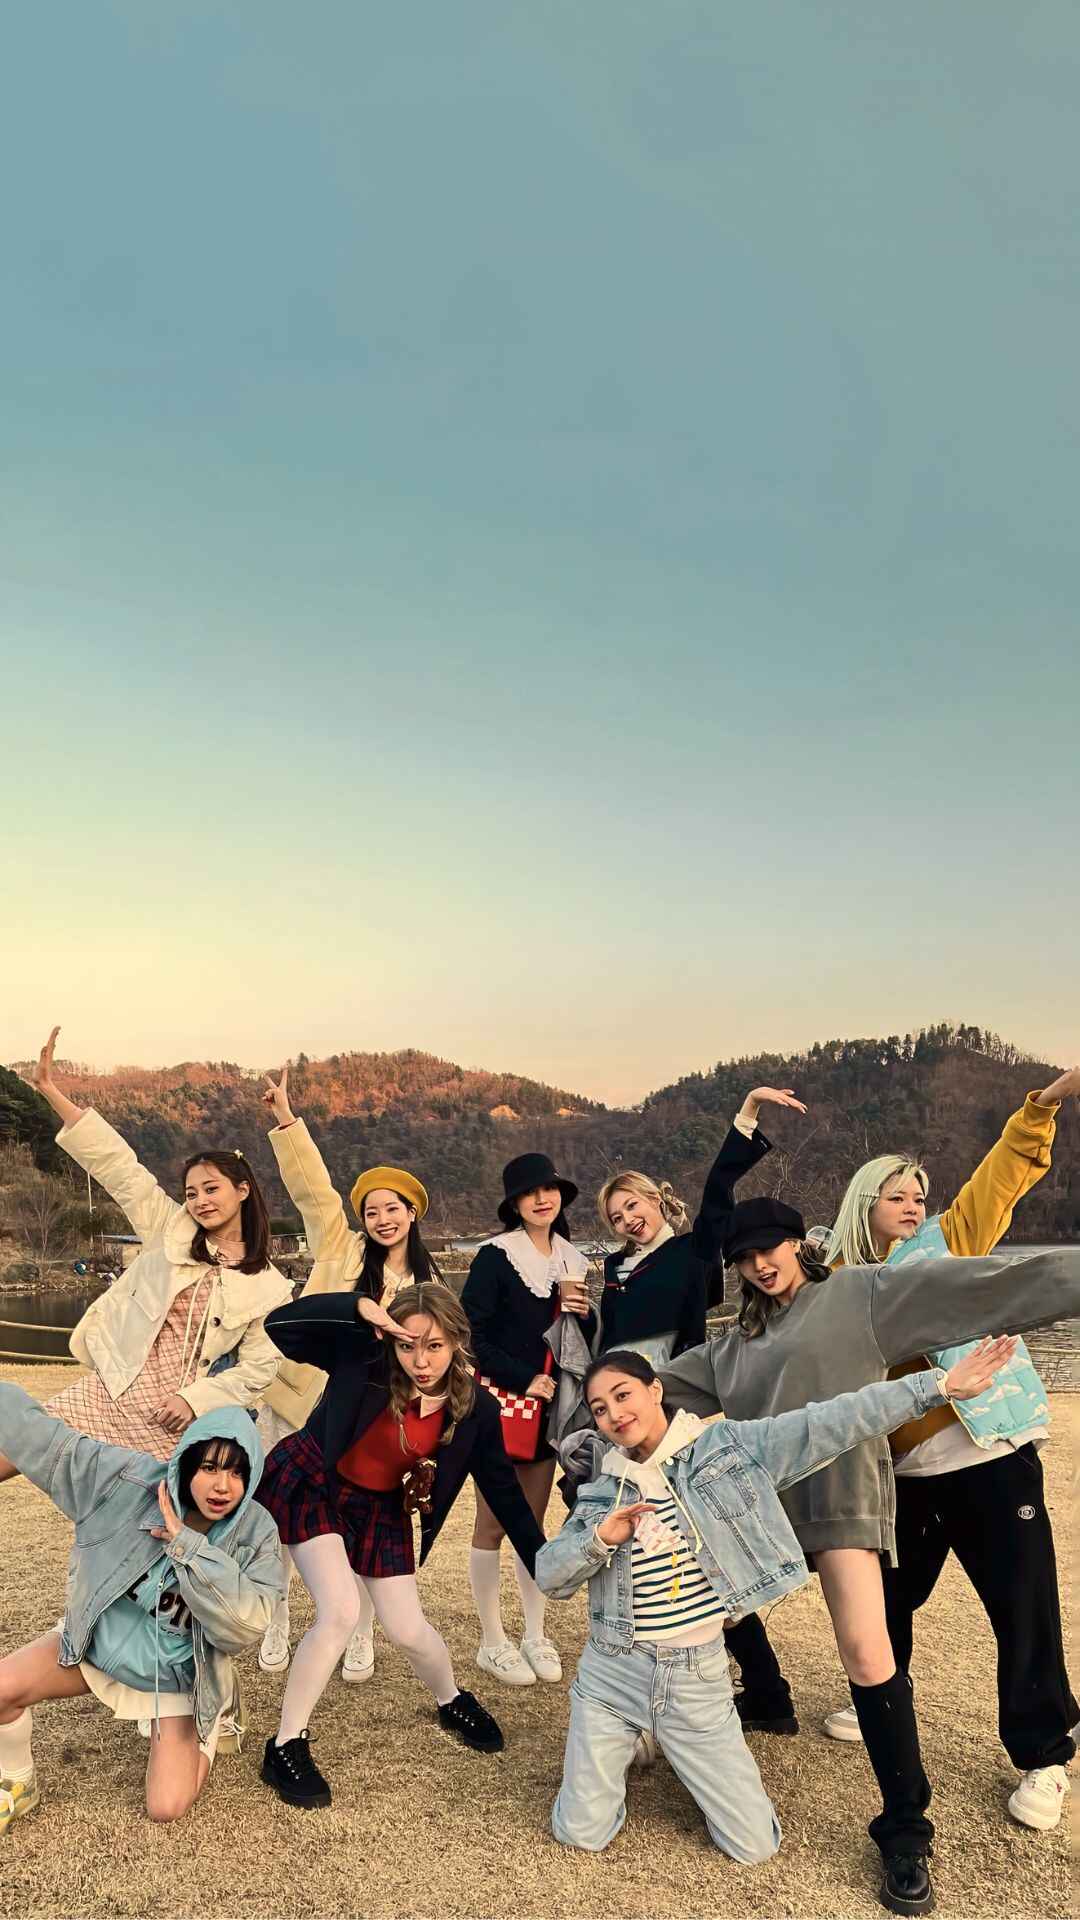 Twice Wallpaper HD Android